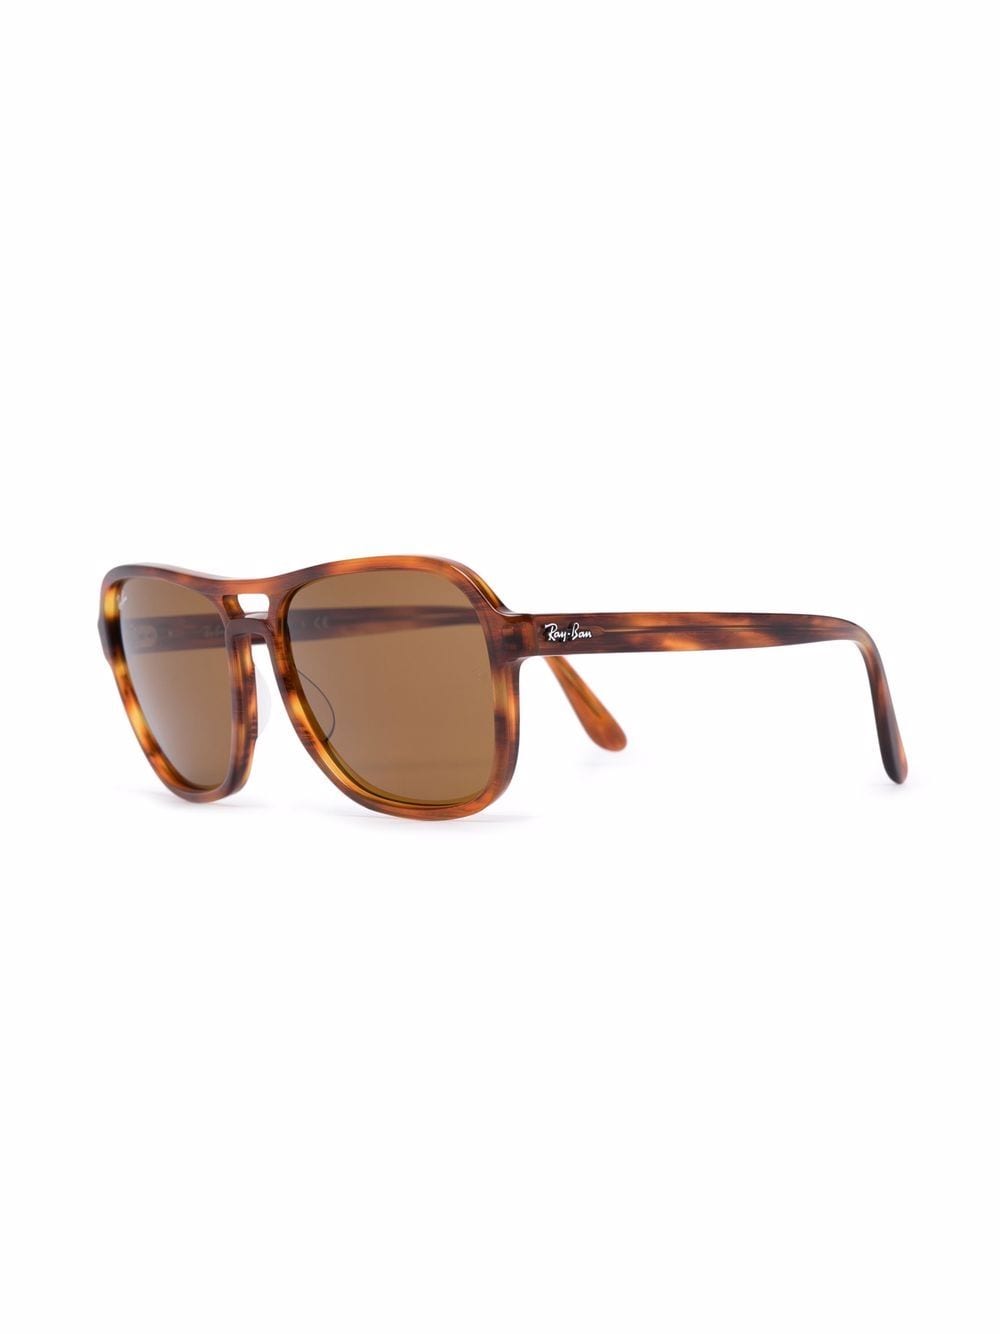 Ray-Ban State Side zonnebril - Bruin